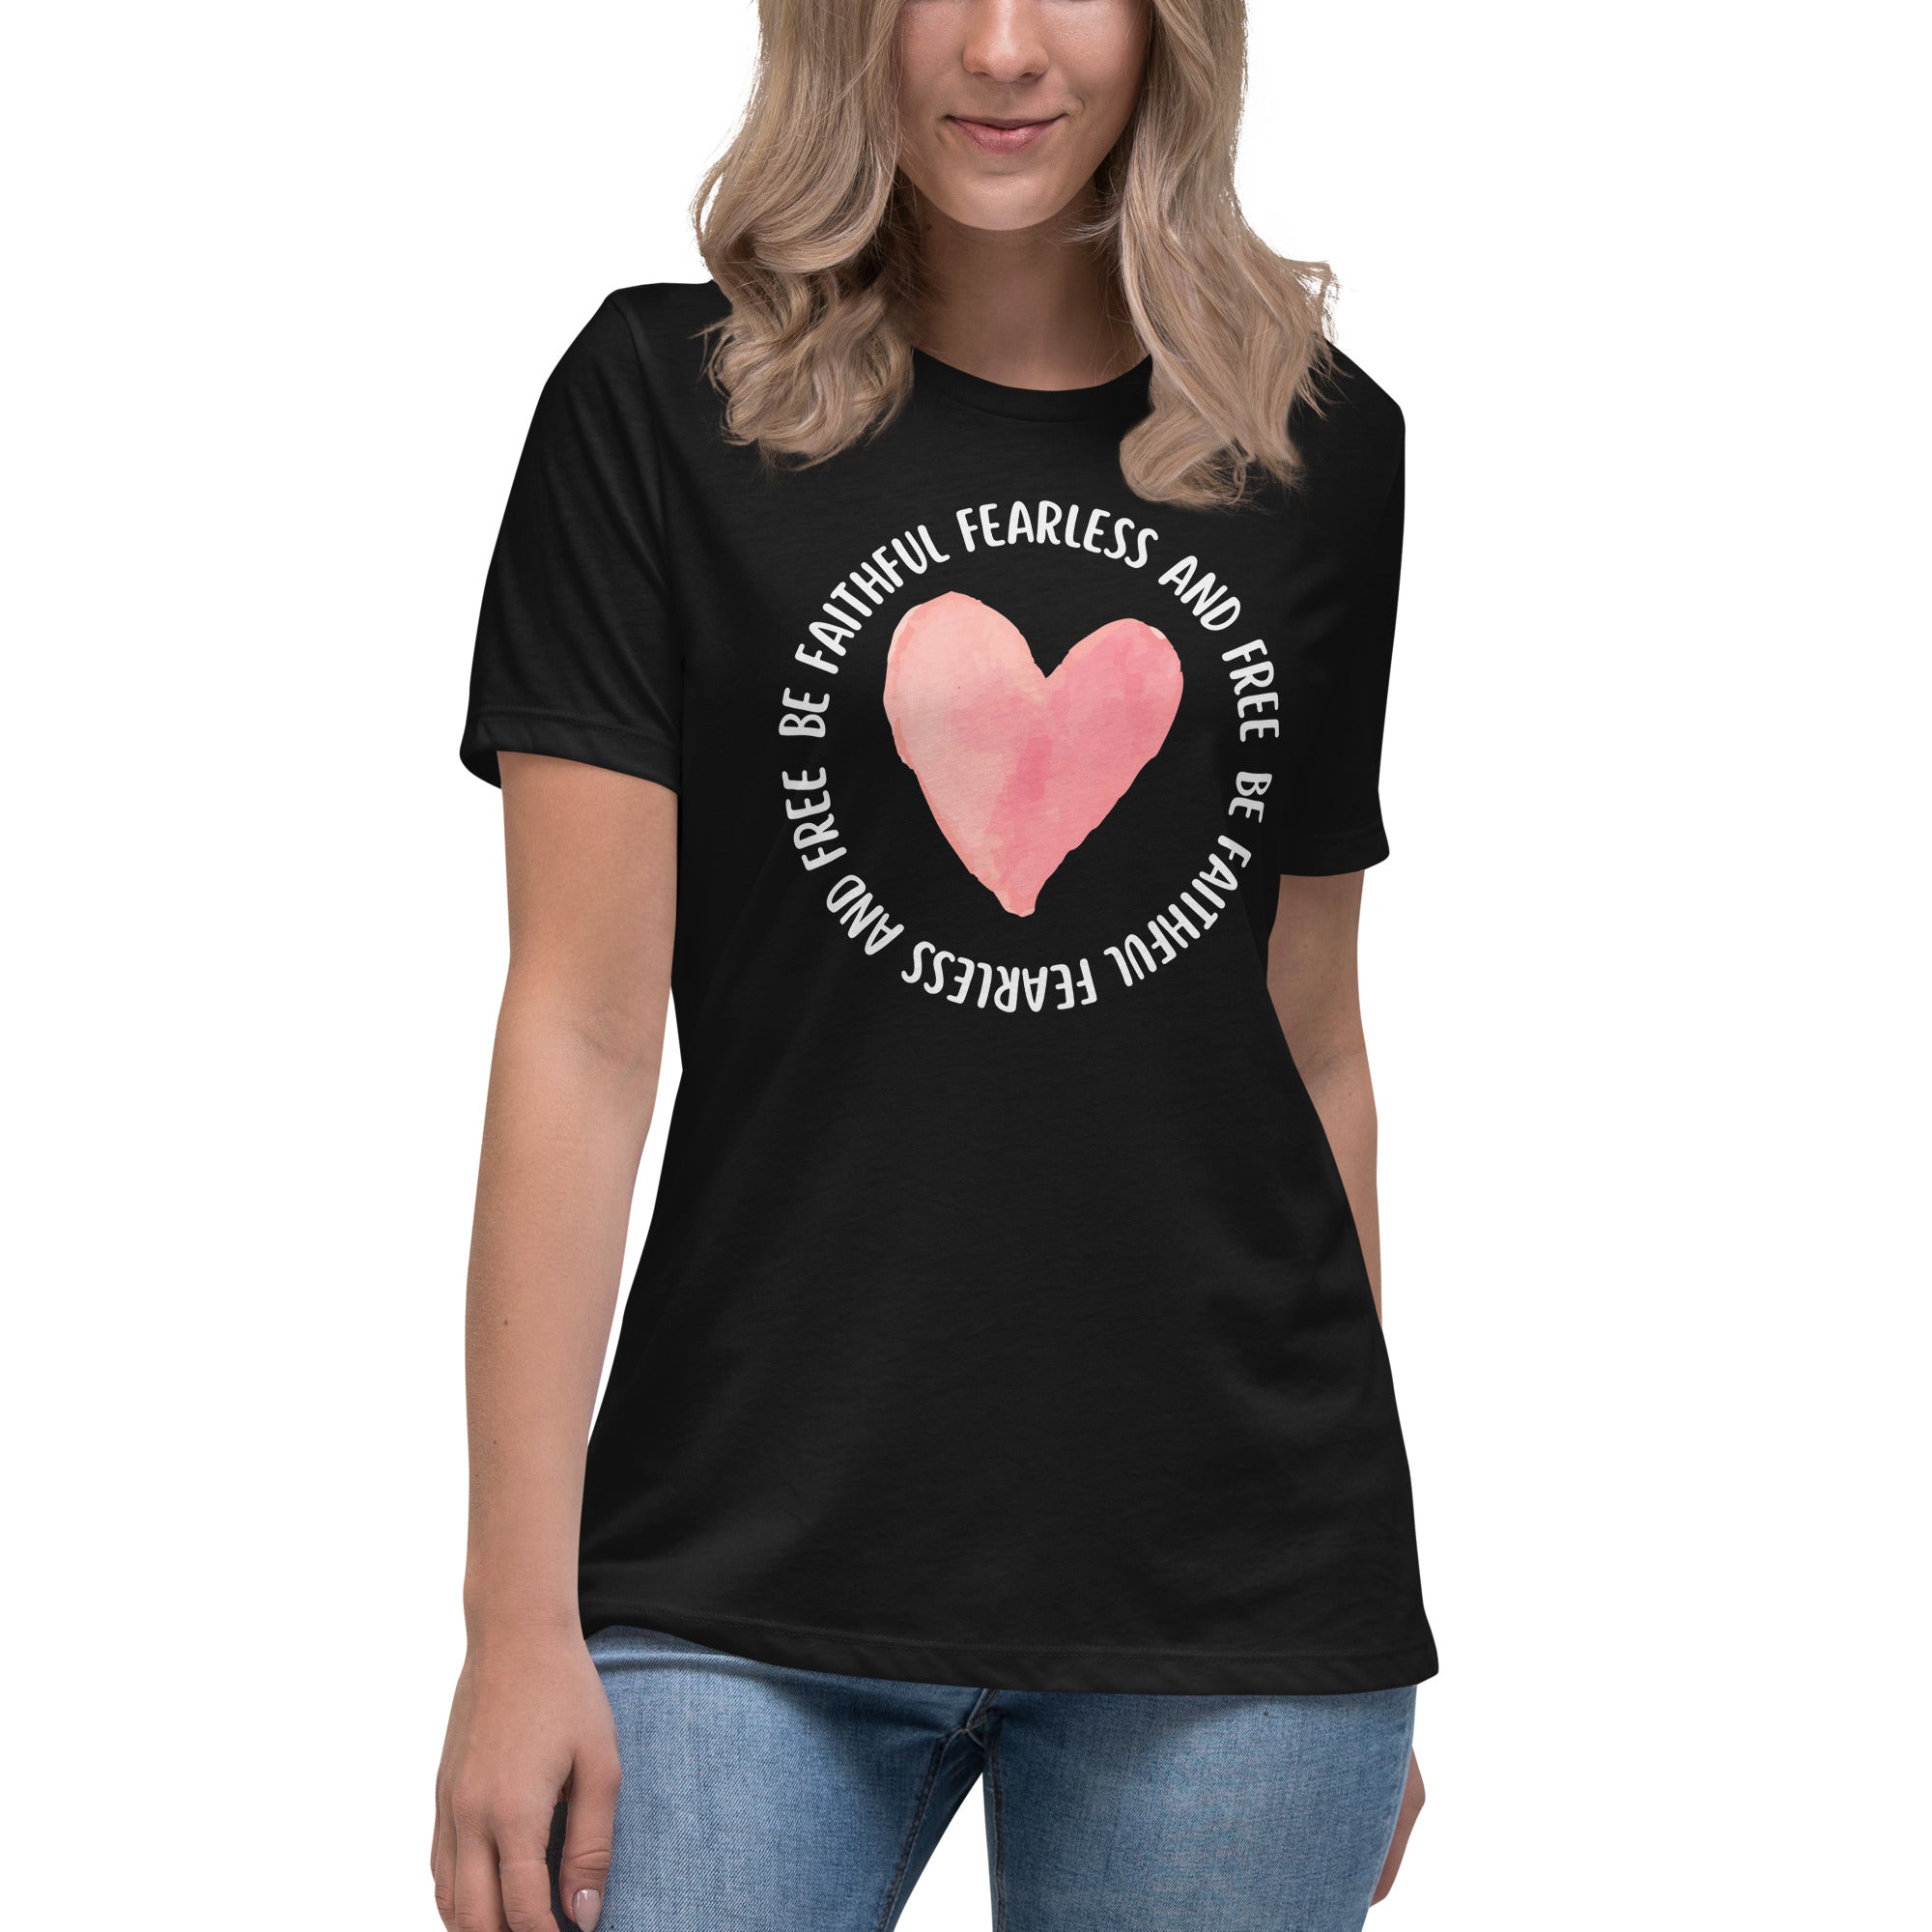 Be Faithful Fearless And Free Women's Relaxed T-Shirt